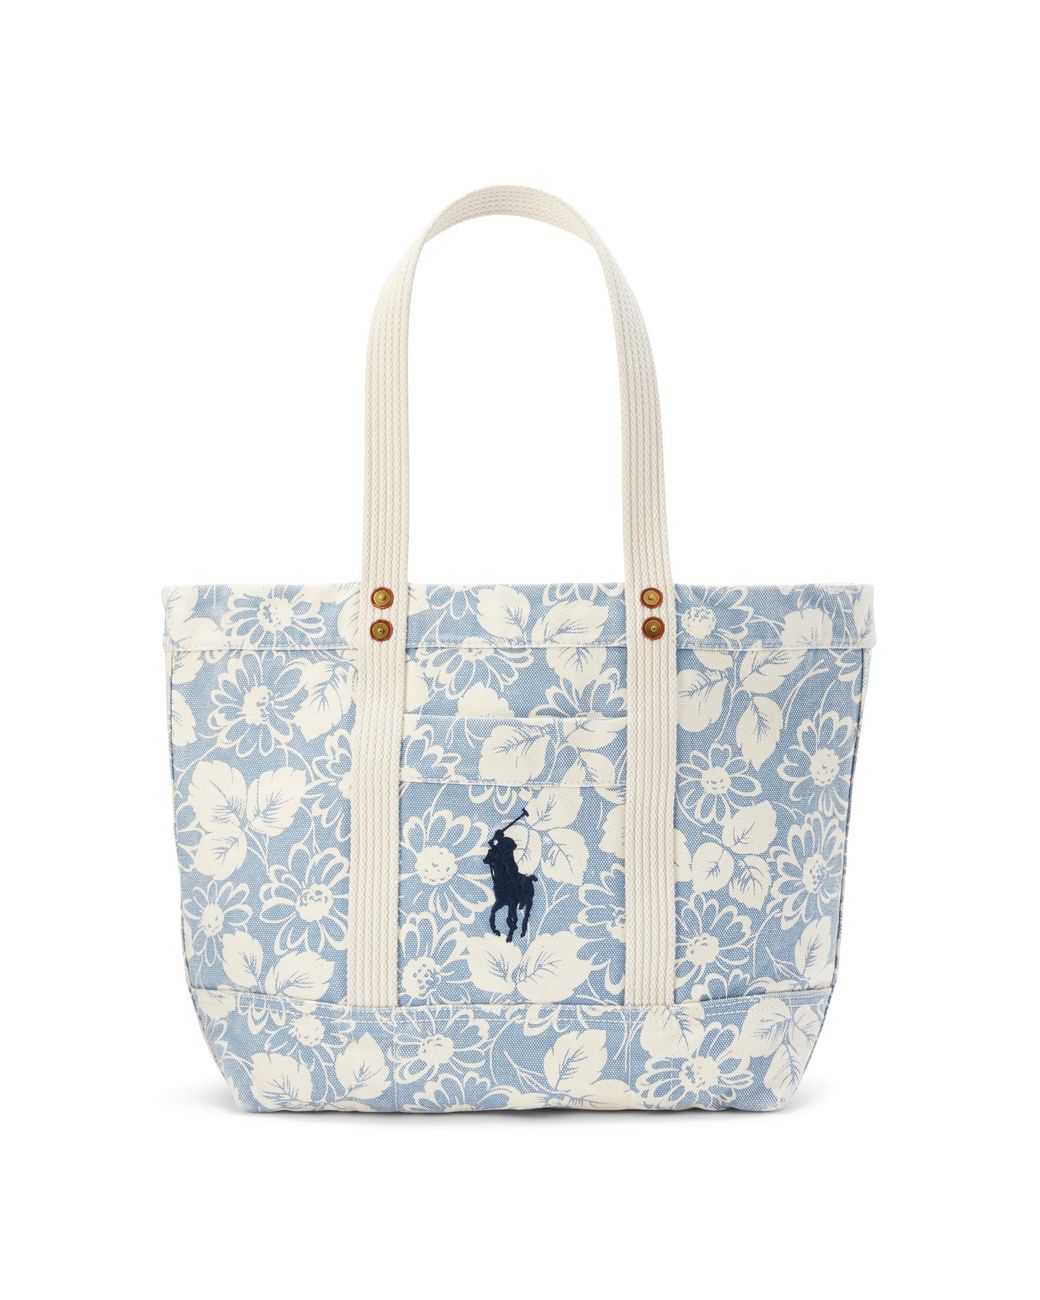 Polo Ralph Lauren Canvas Floral Medium Tote in Blue/White (Blue) | Lyst